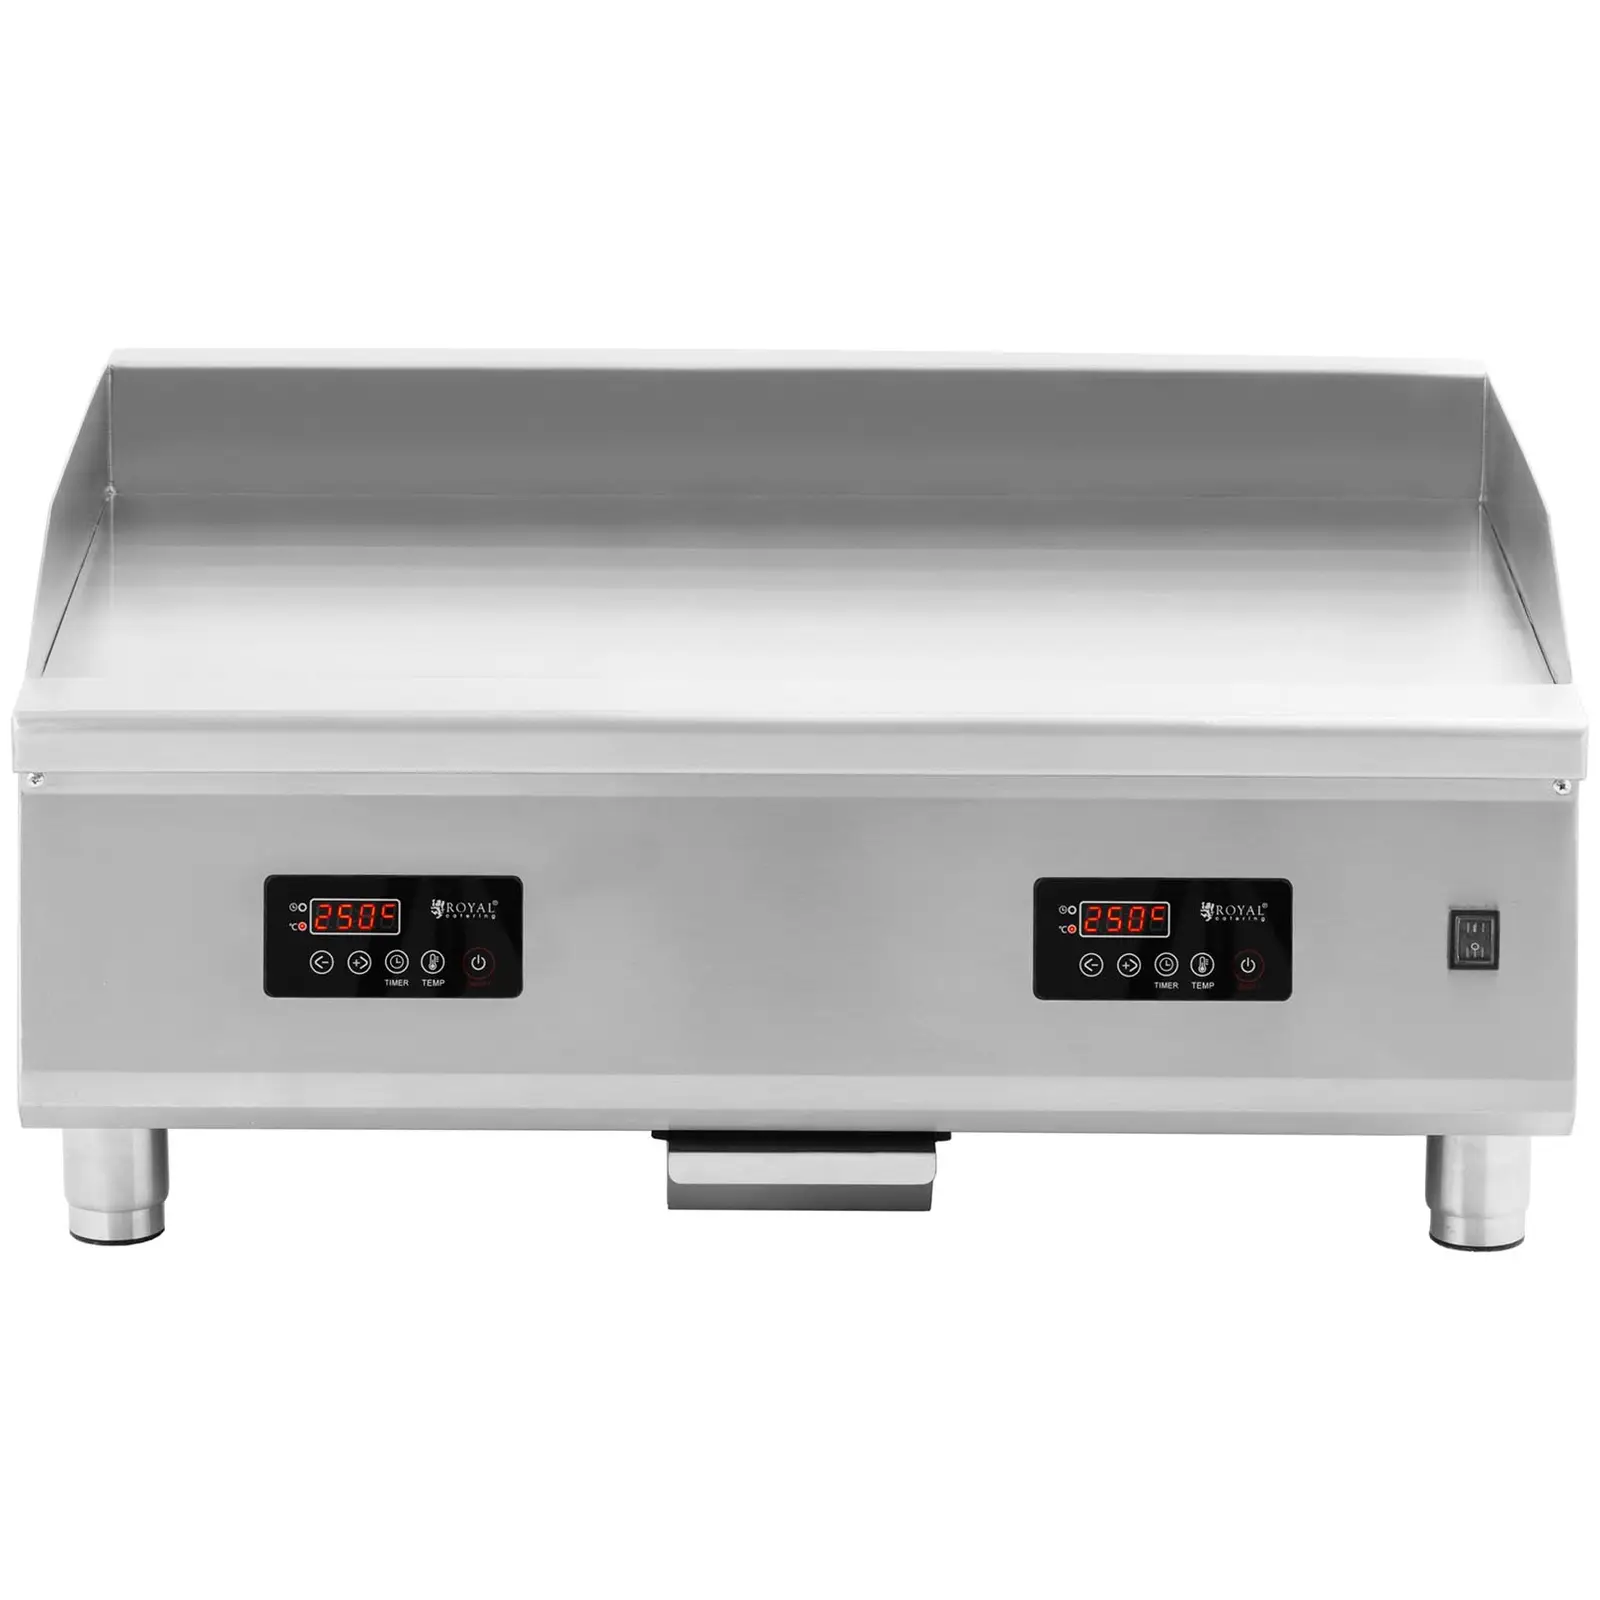 Double Induction Grill - 910 x 520 mm - smooth - 2 x 6000 W - Royal Catering